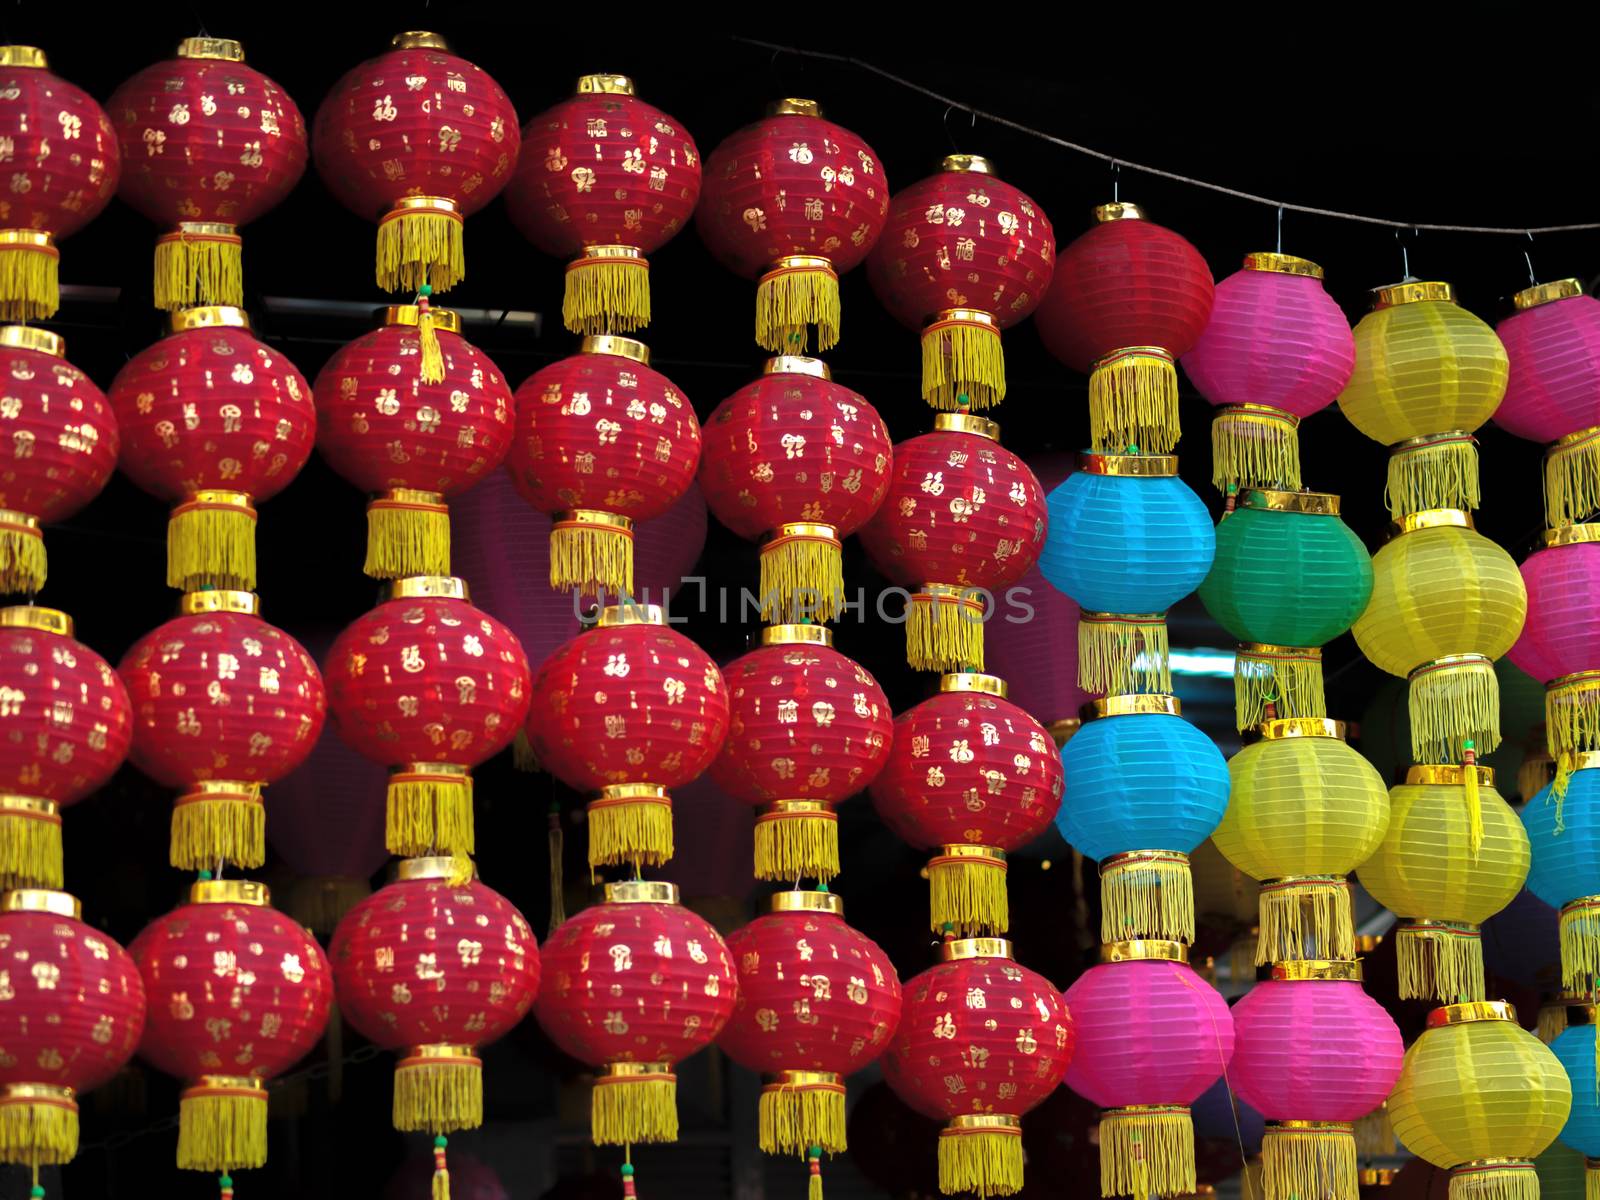 COLOR PHOTO OF COLORFUL PAPER LANTERNS FOR SALE